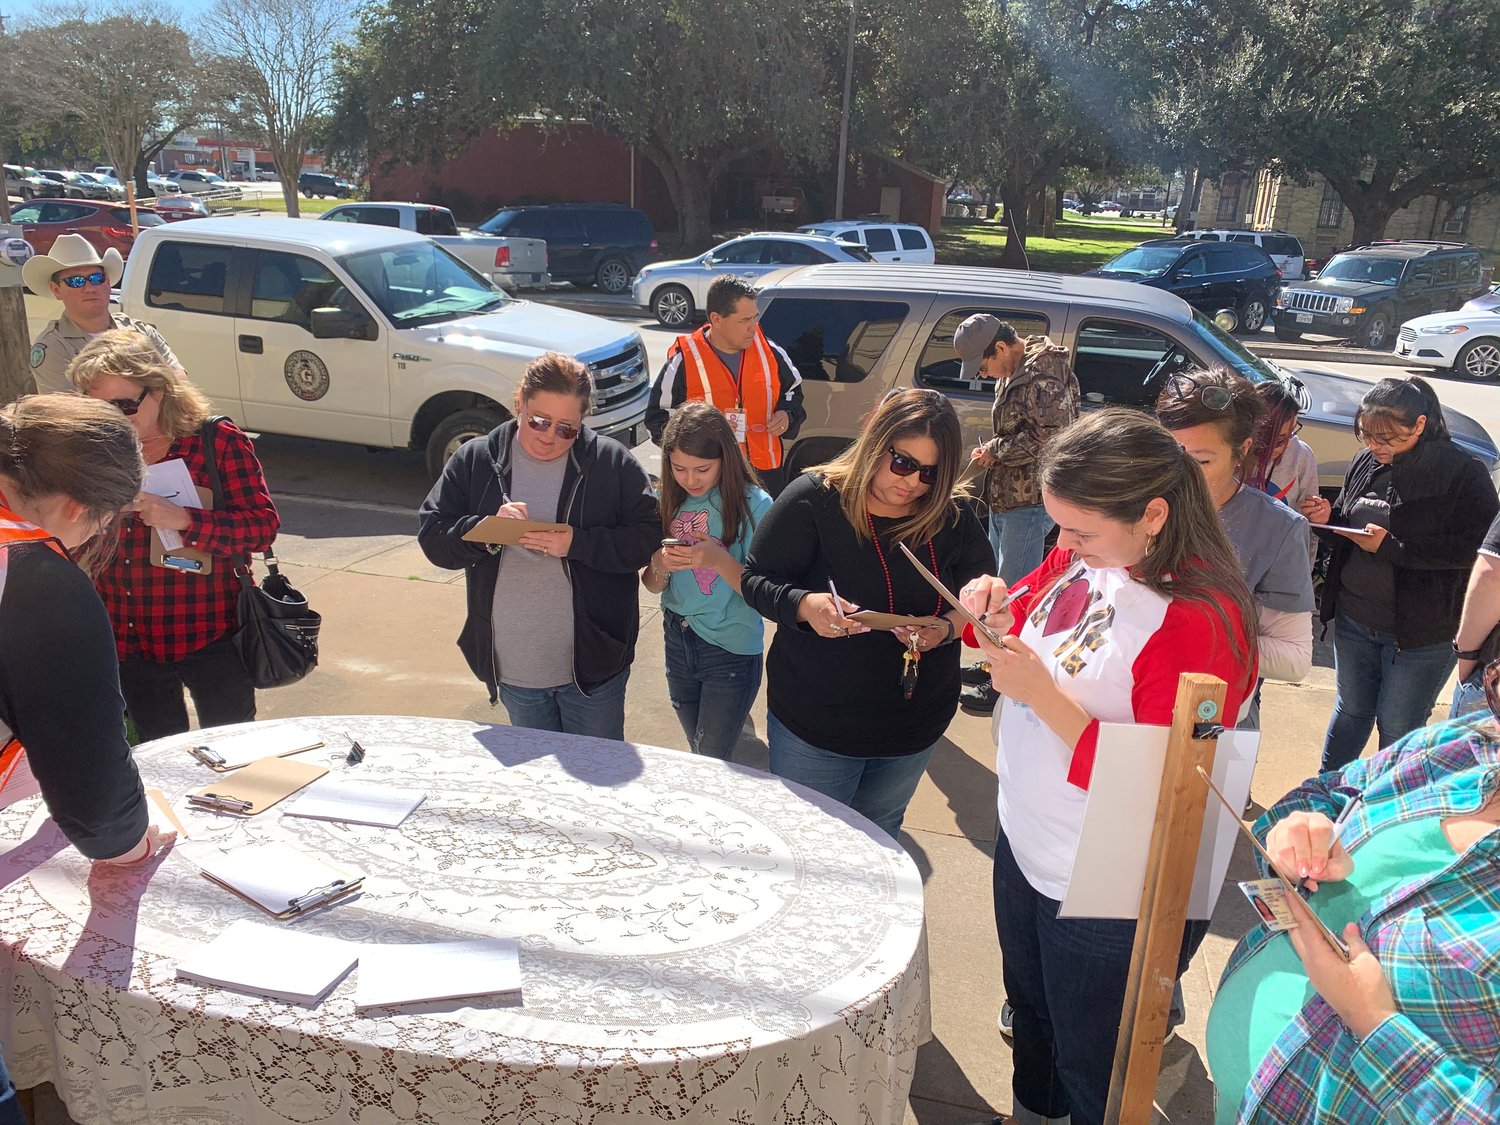 Gonzales ISD underwent an intruder drill last Friday at Gonzales Junior High with the help of students and parents who volunteered their time to conduct the procedure.